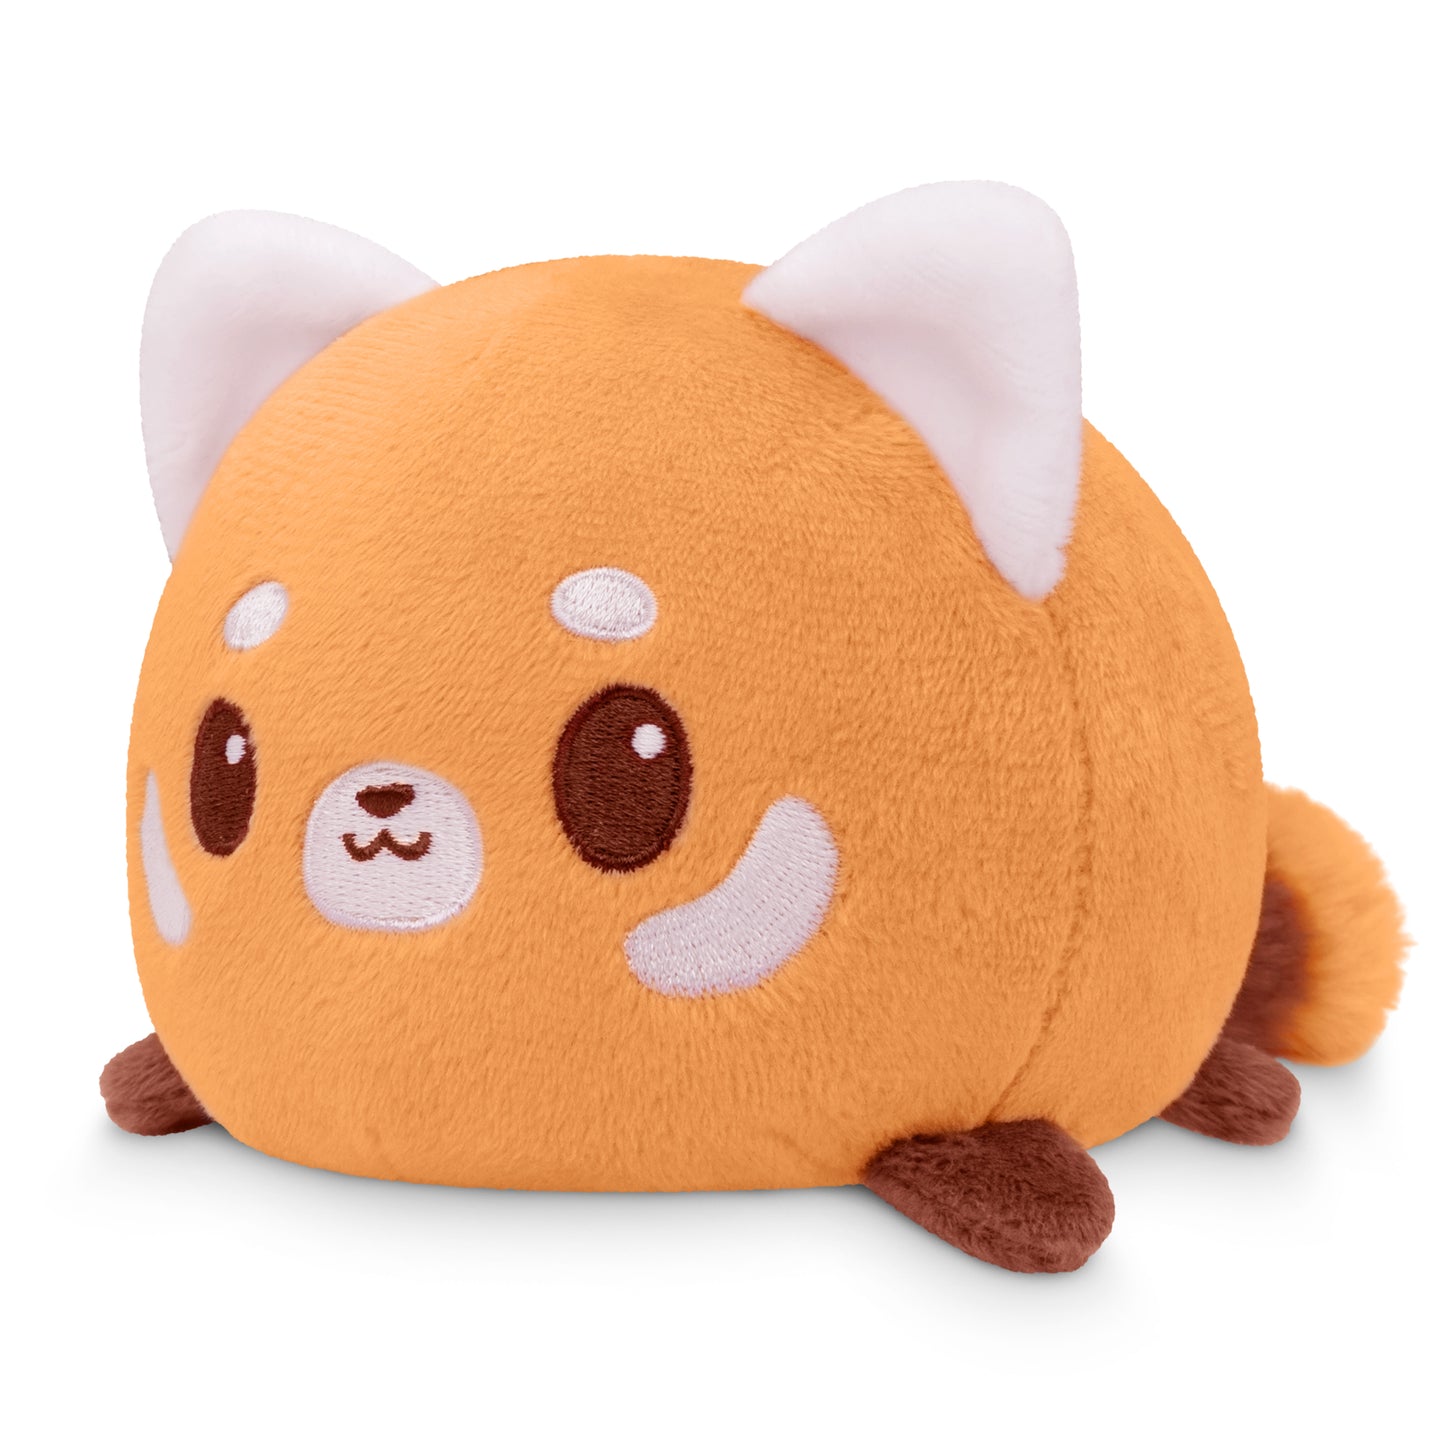 A TeeTurtle Plushiverse Bamboo Snack Plushie Tote Bag of a round, orange character with white and brown accents designed to resemble a smiling animal.